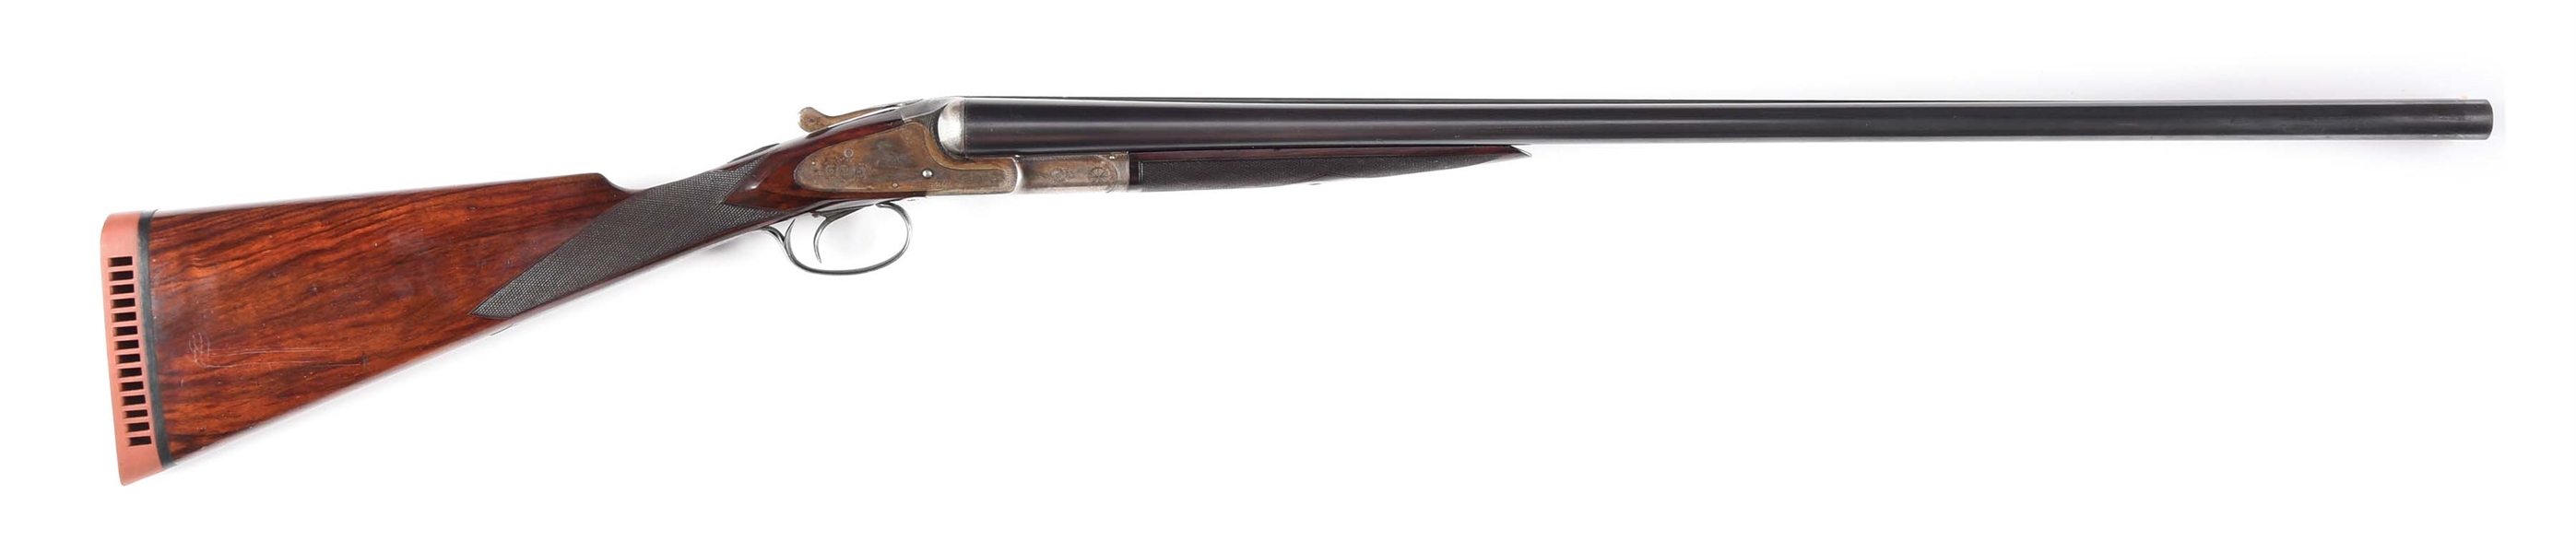 (C) EXCEPTIONAL HIGH ORIGINAL CONDITION L. C. SMITH "PIGEON GRADE" SHOTGUN WITH EJECTORS AND SINGLE SELECTIVE TRIGGER.